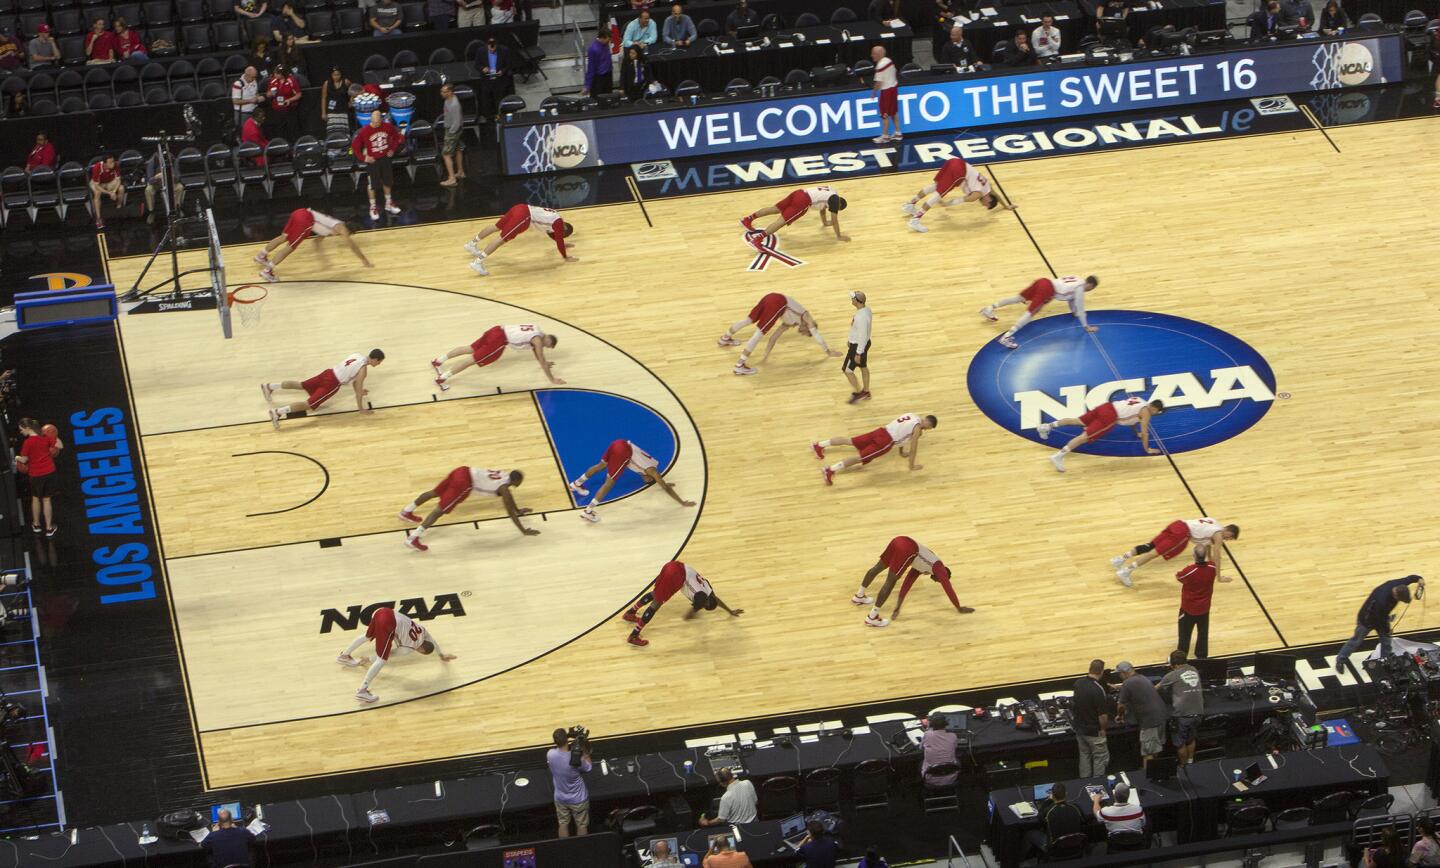 Wisconsin players stretch on the court during practice on Wednesday at Staples Center, the day before their NCAA tournament West Regional game against the North Carolina Tar Heels.